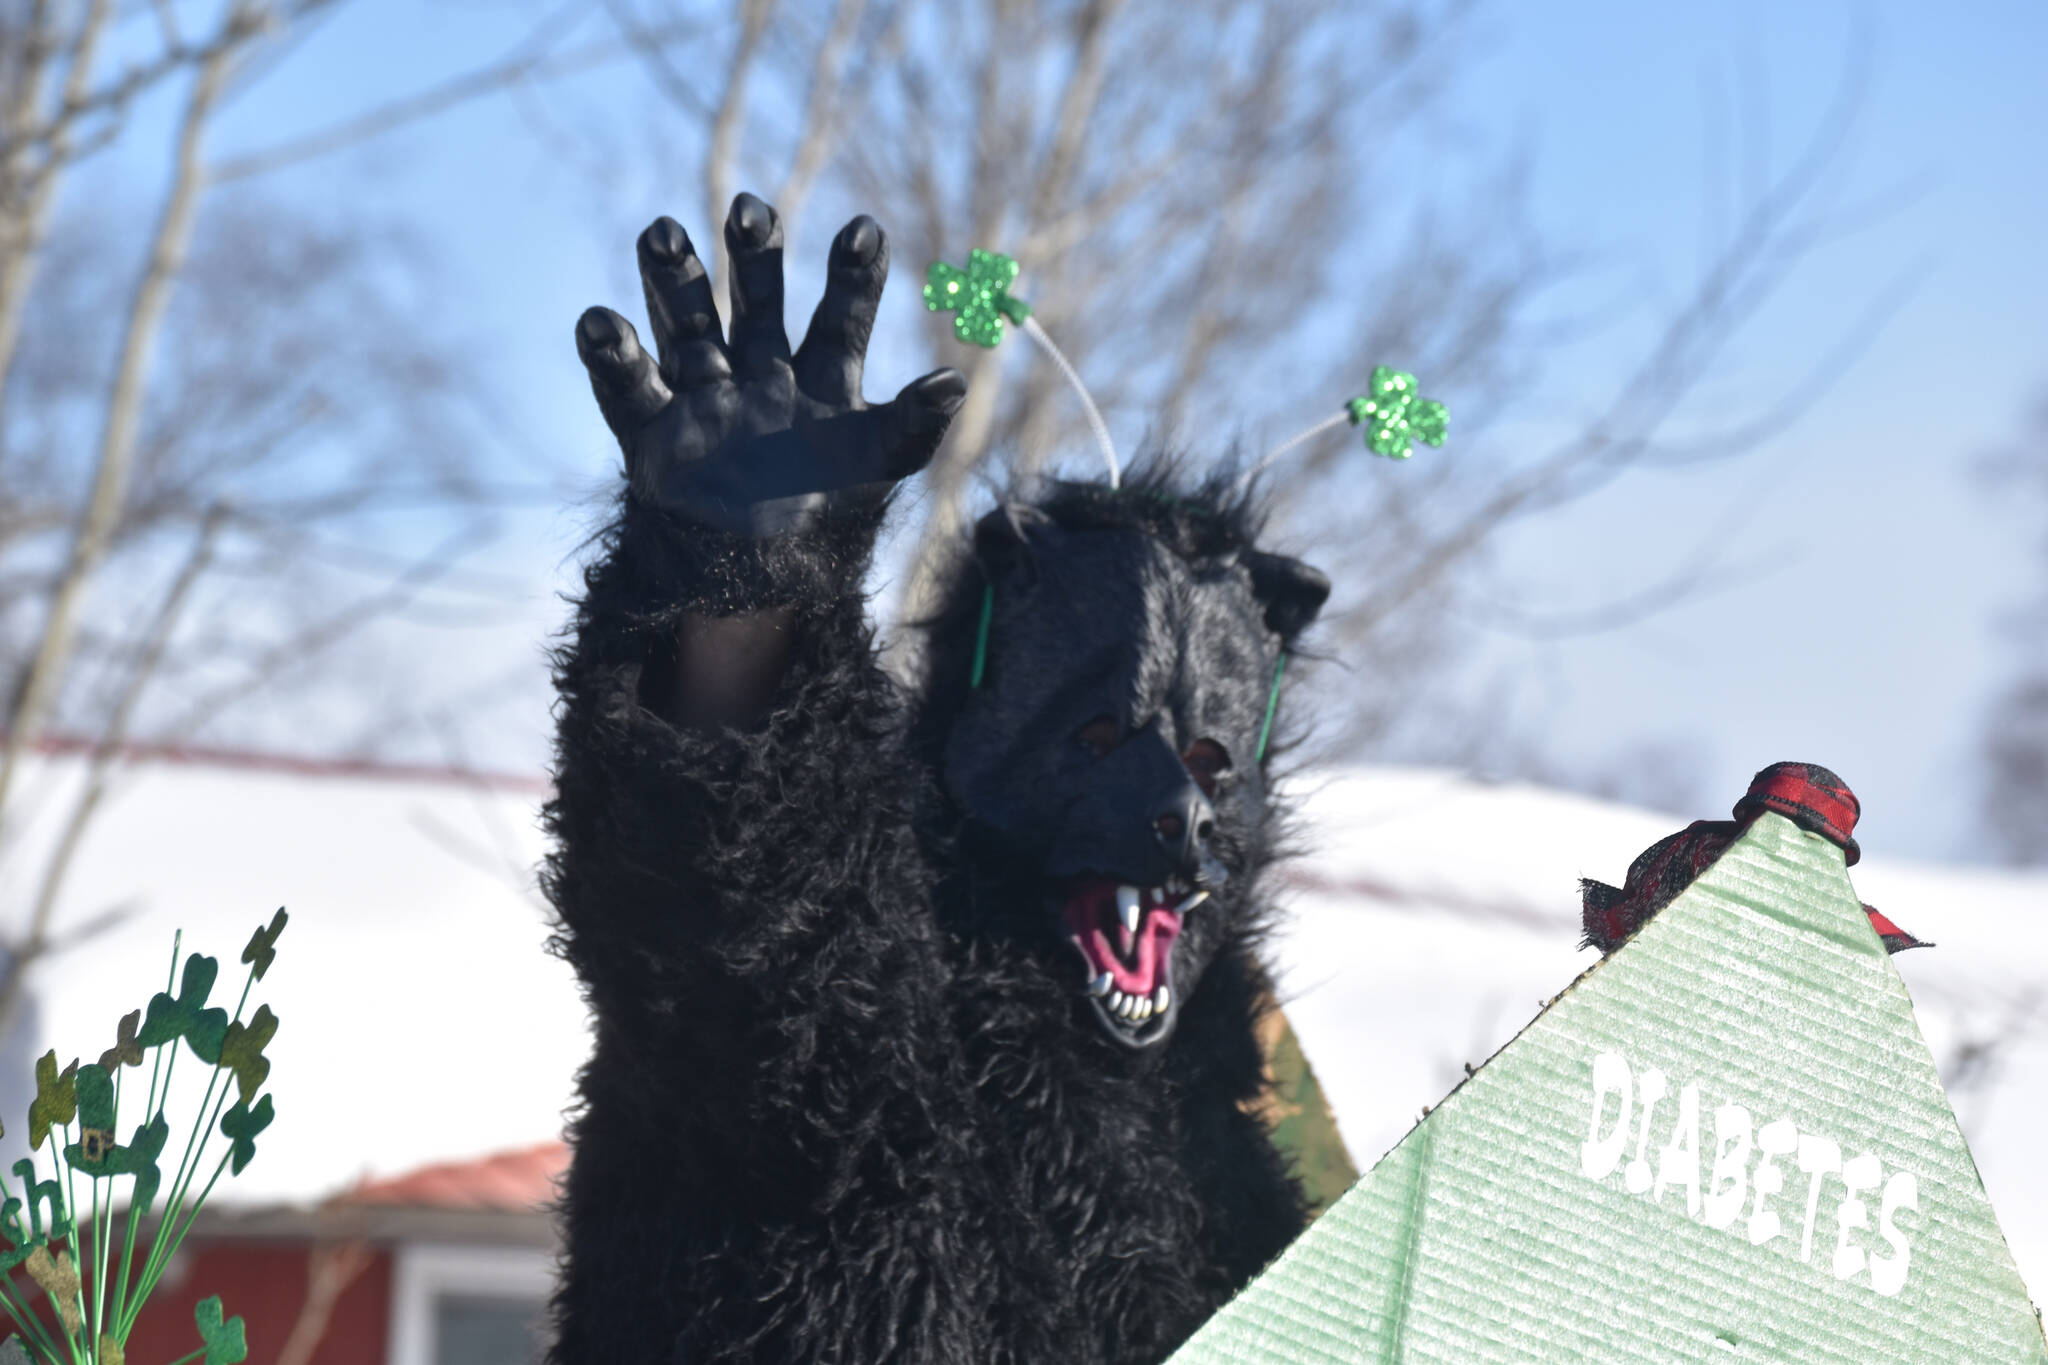 A bear waves from the back of a truck as the 32nd annual Sweeney’s St. Patrick’s Day Parade proceeds down Fireweed Street in Soldotna, Alaska on Friday, March 17, 2023. (Jake Dye/Peninsula Clarion)